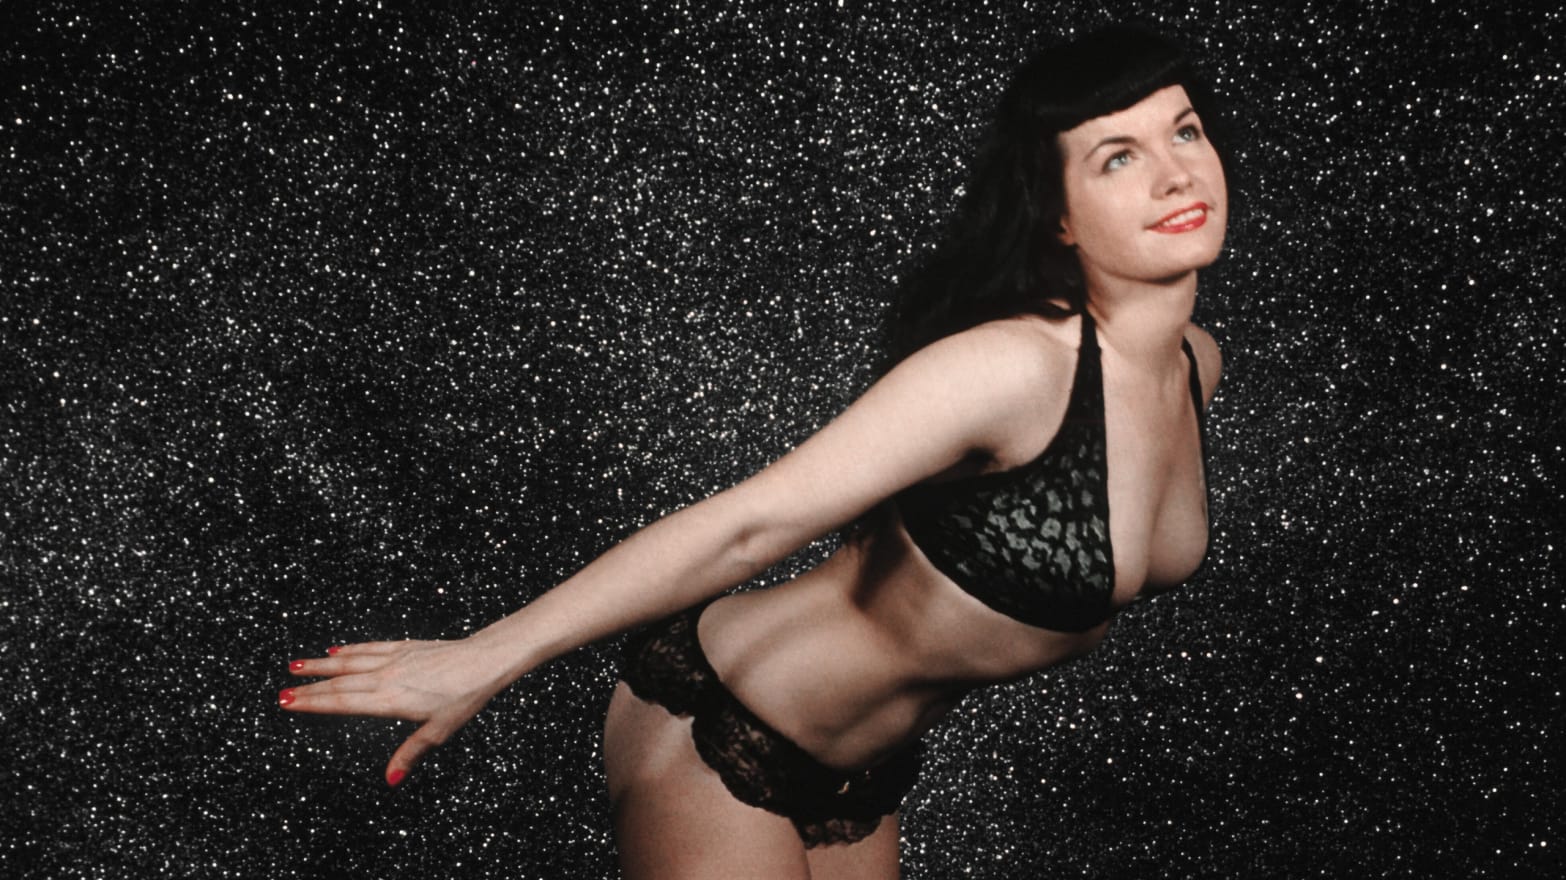 Bettie Page Reveals All, A Close-Up Look at the Pinup Goddess and Sexual Icon picture